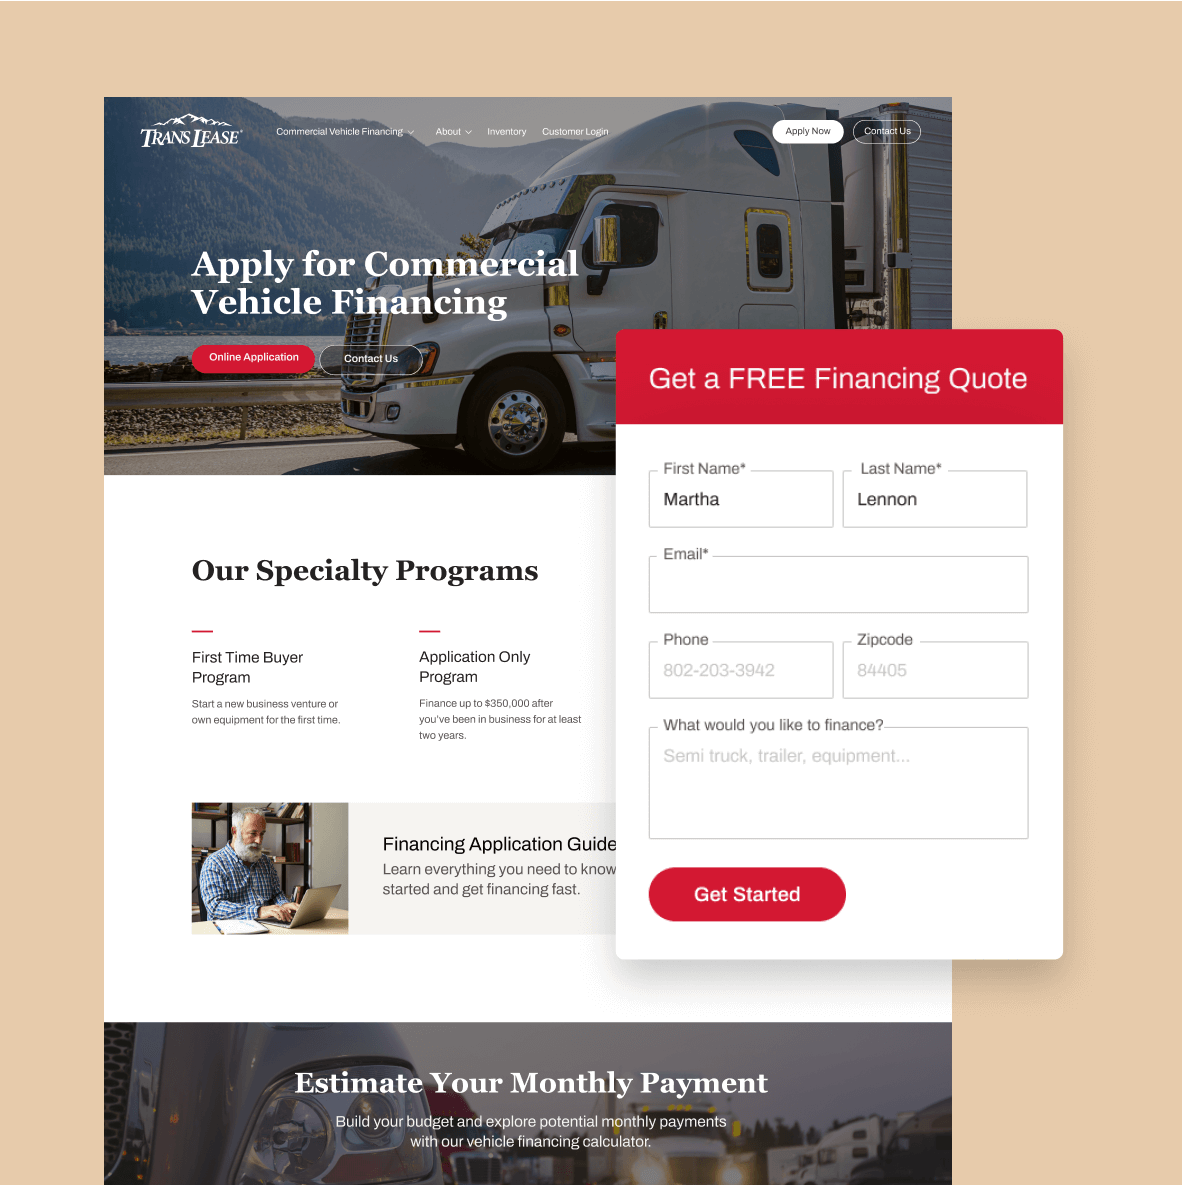 website with a conversion oriented form